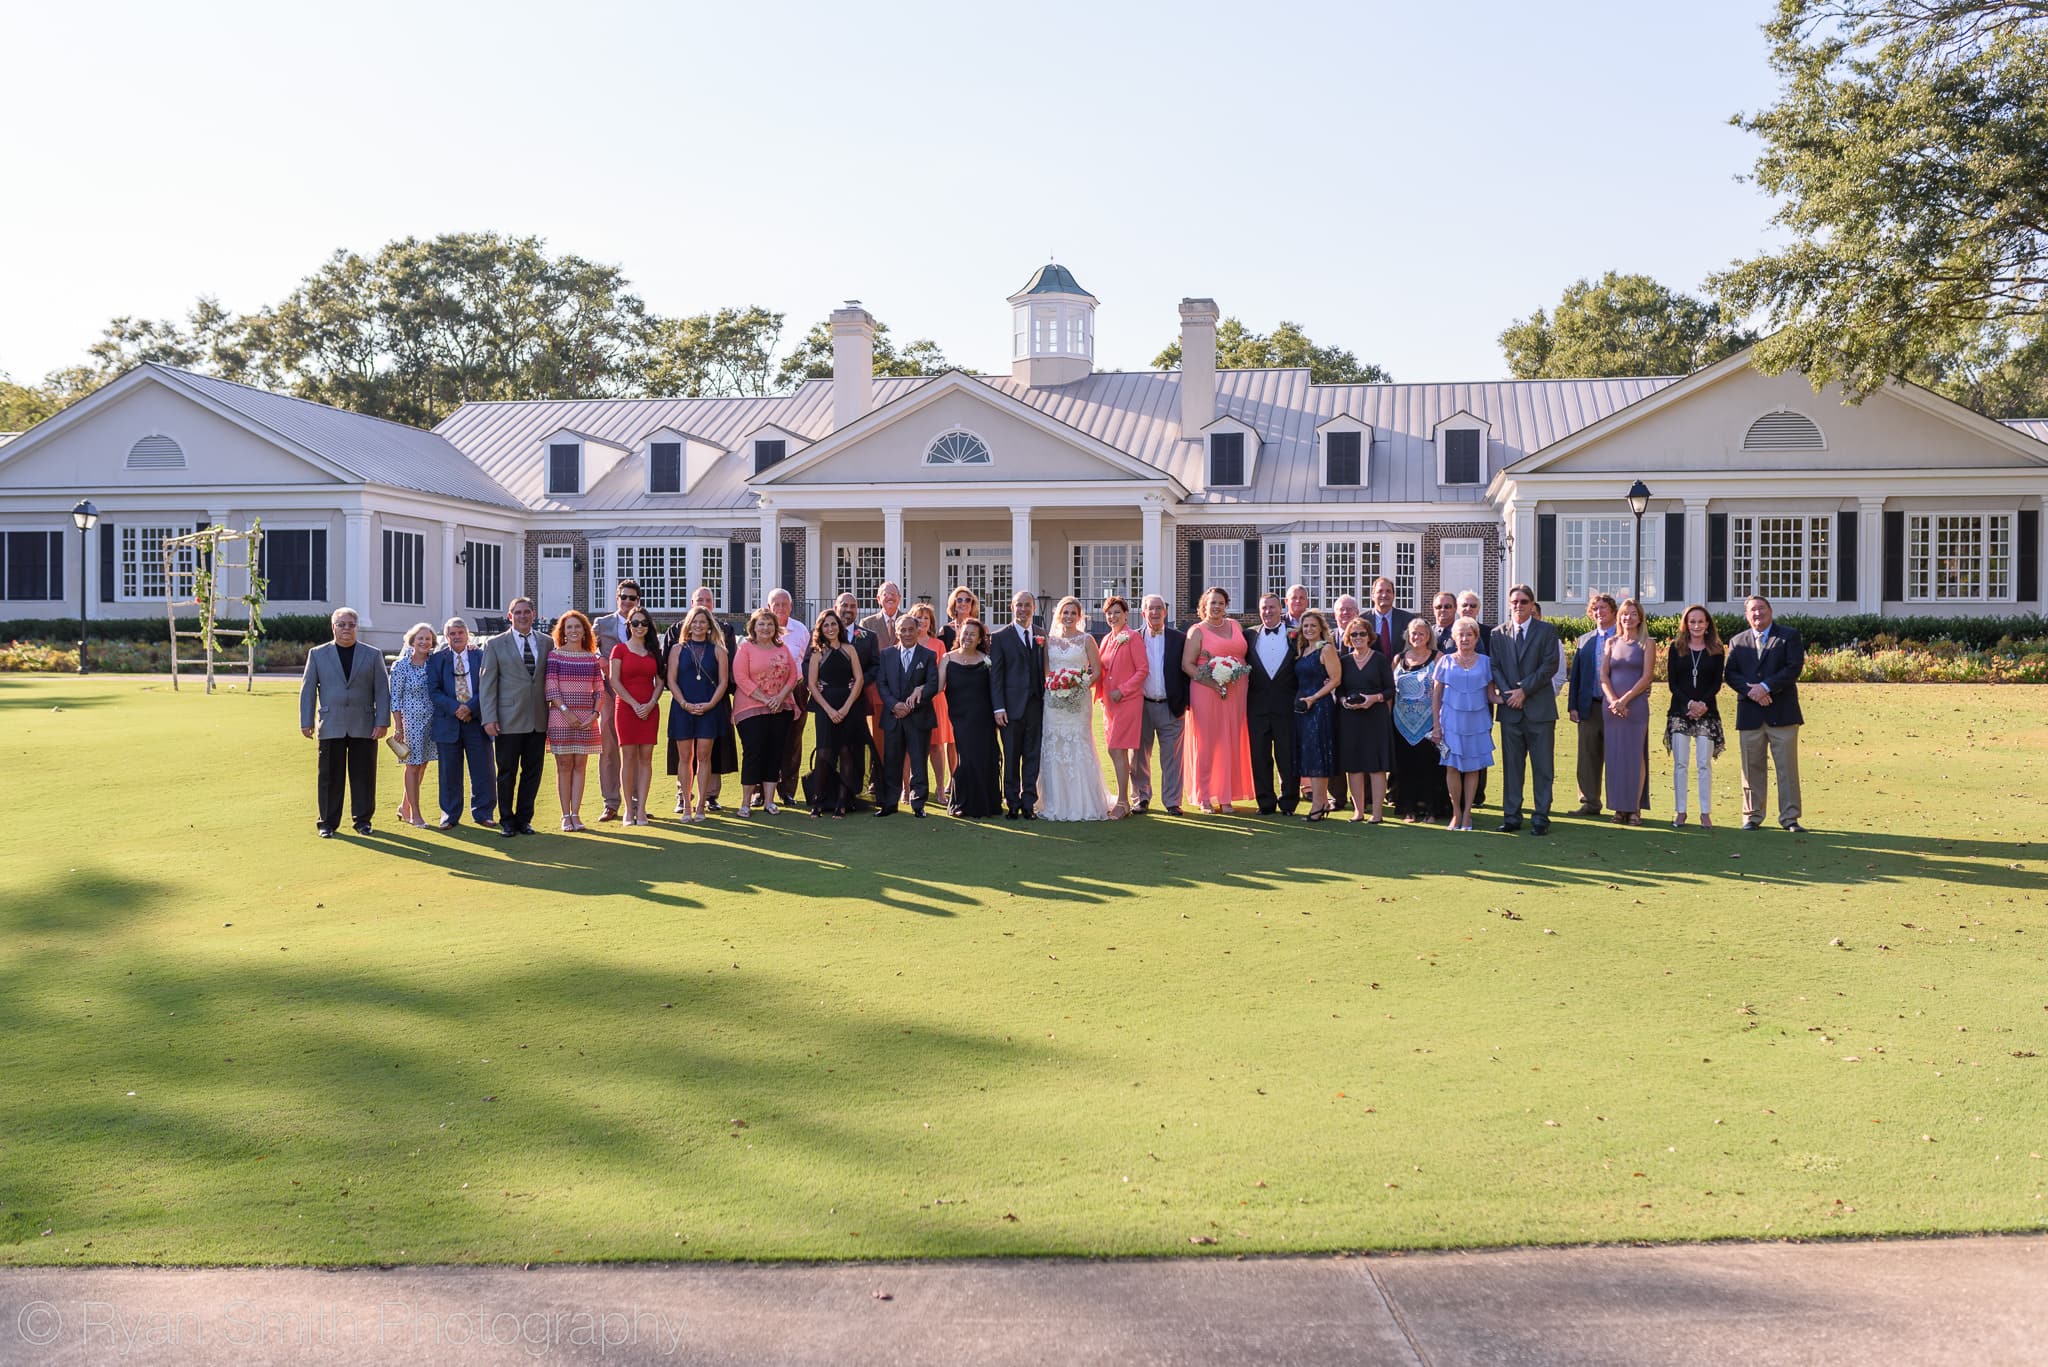 After wedding group picture - Pawleys Plantation